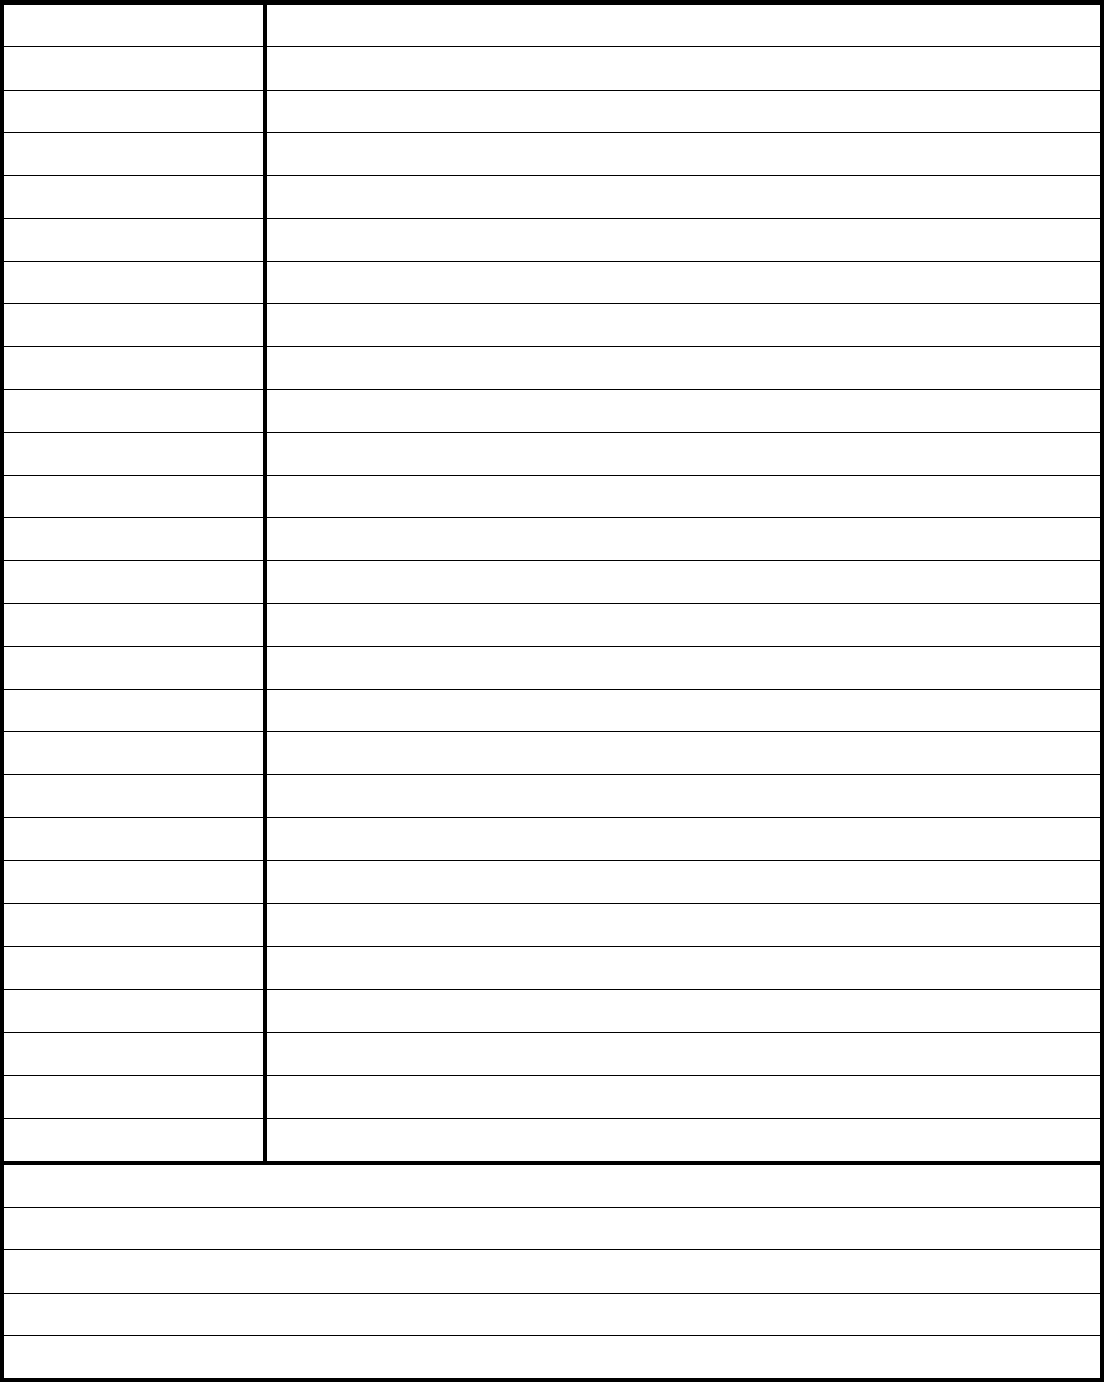 Avid Cornell Notes Template Download sblogbrown